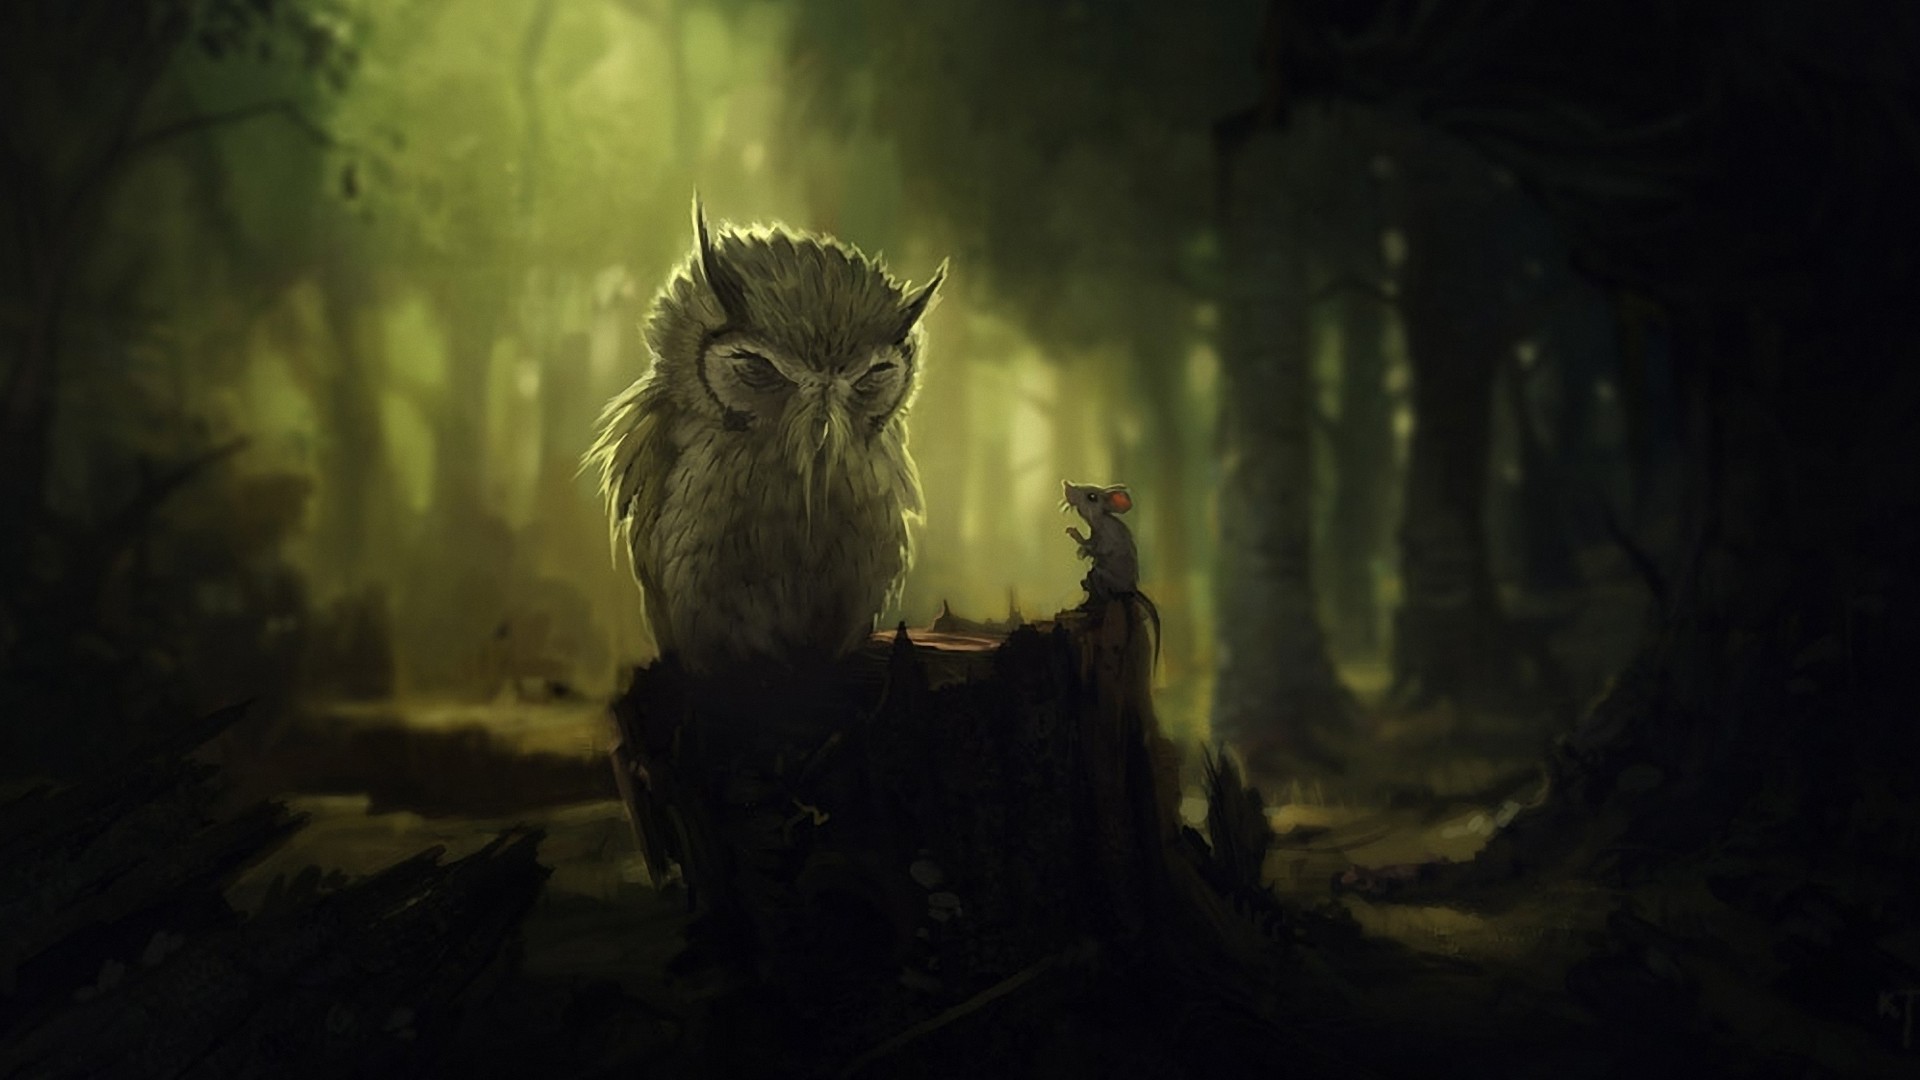 1920x1080 Owl HD Wallpapers Backgrounds Wallpaper | HD Wallpapers | Pinterest | Owl  wallpaper, Owl and Wallpaper backgrounds